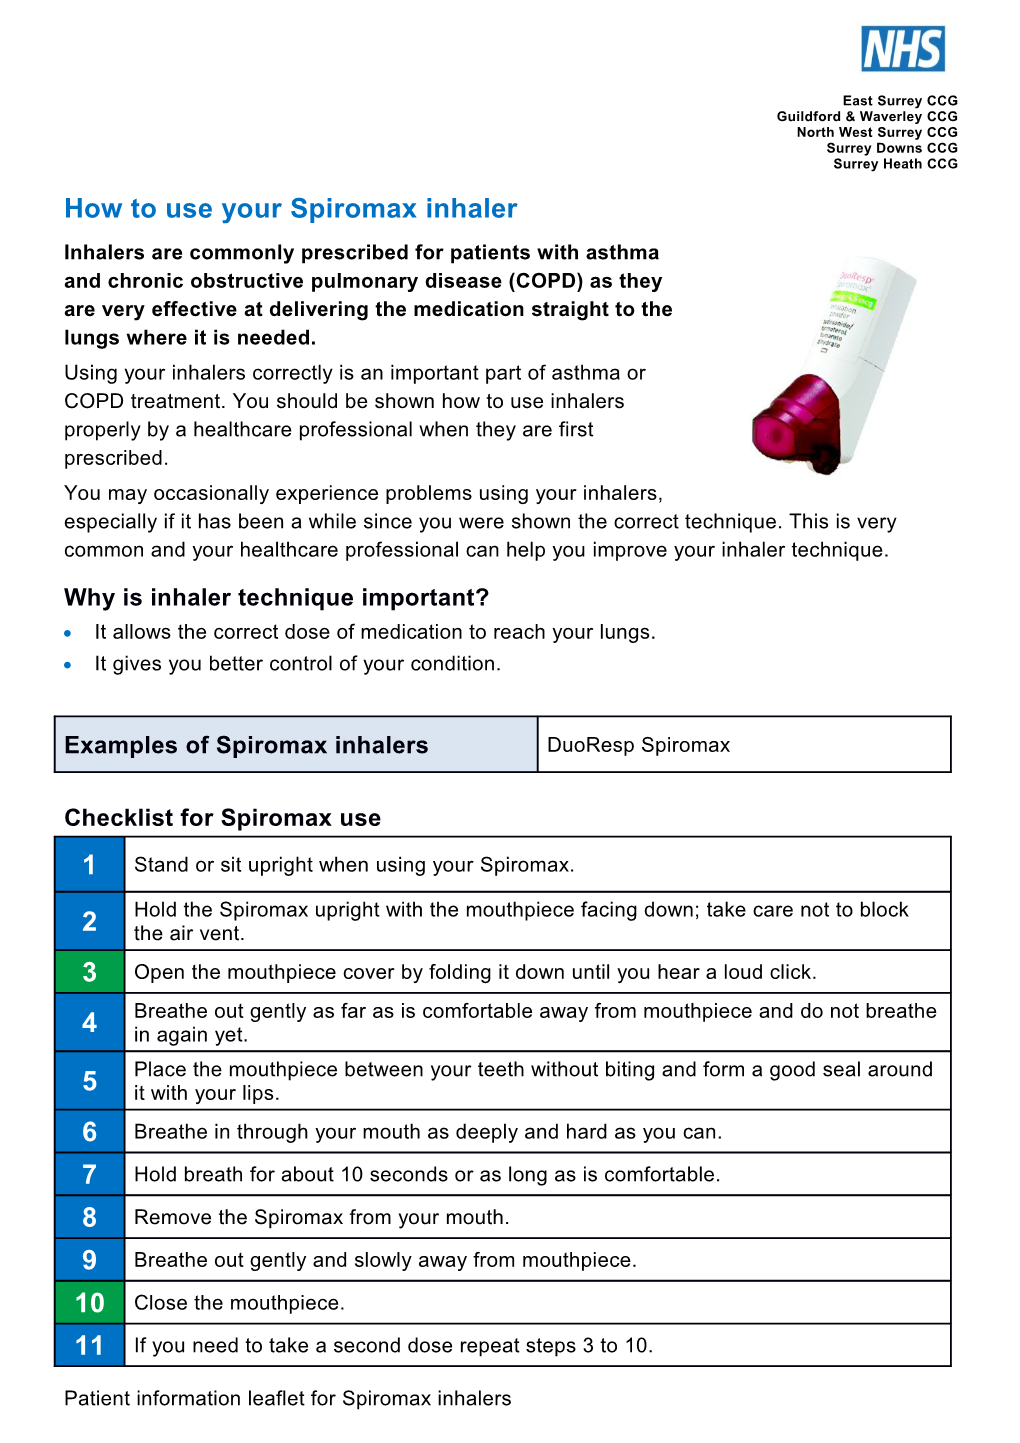 How to Use Your Spiromax Inhaler